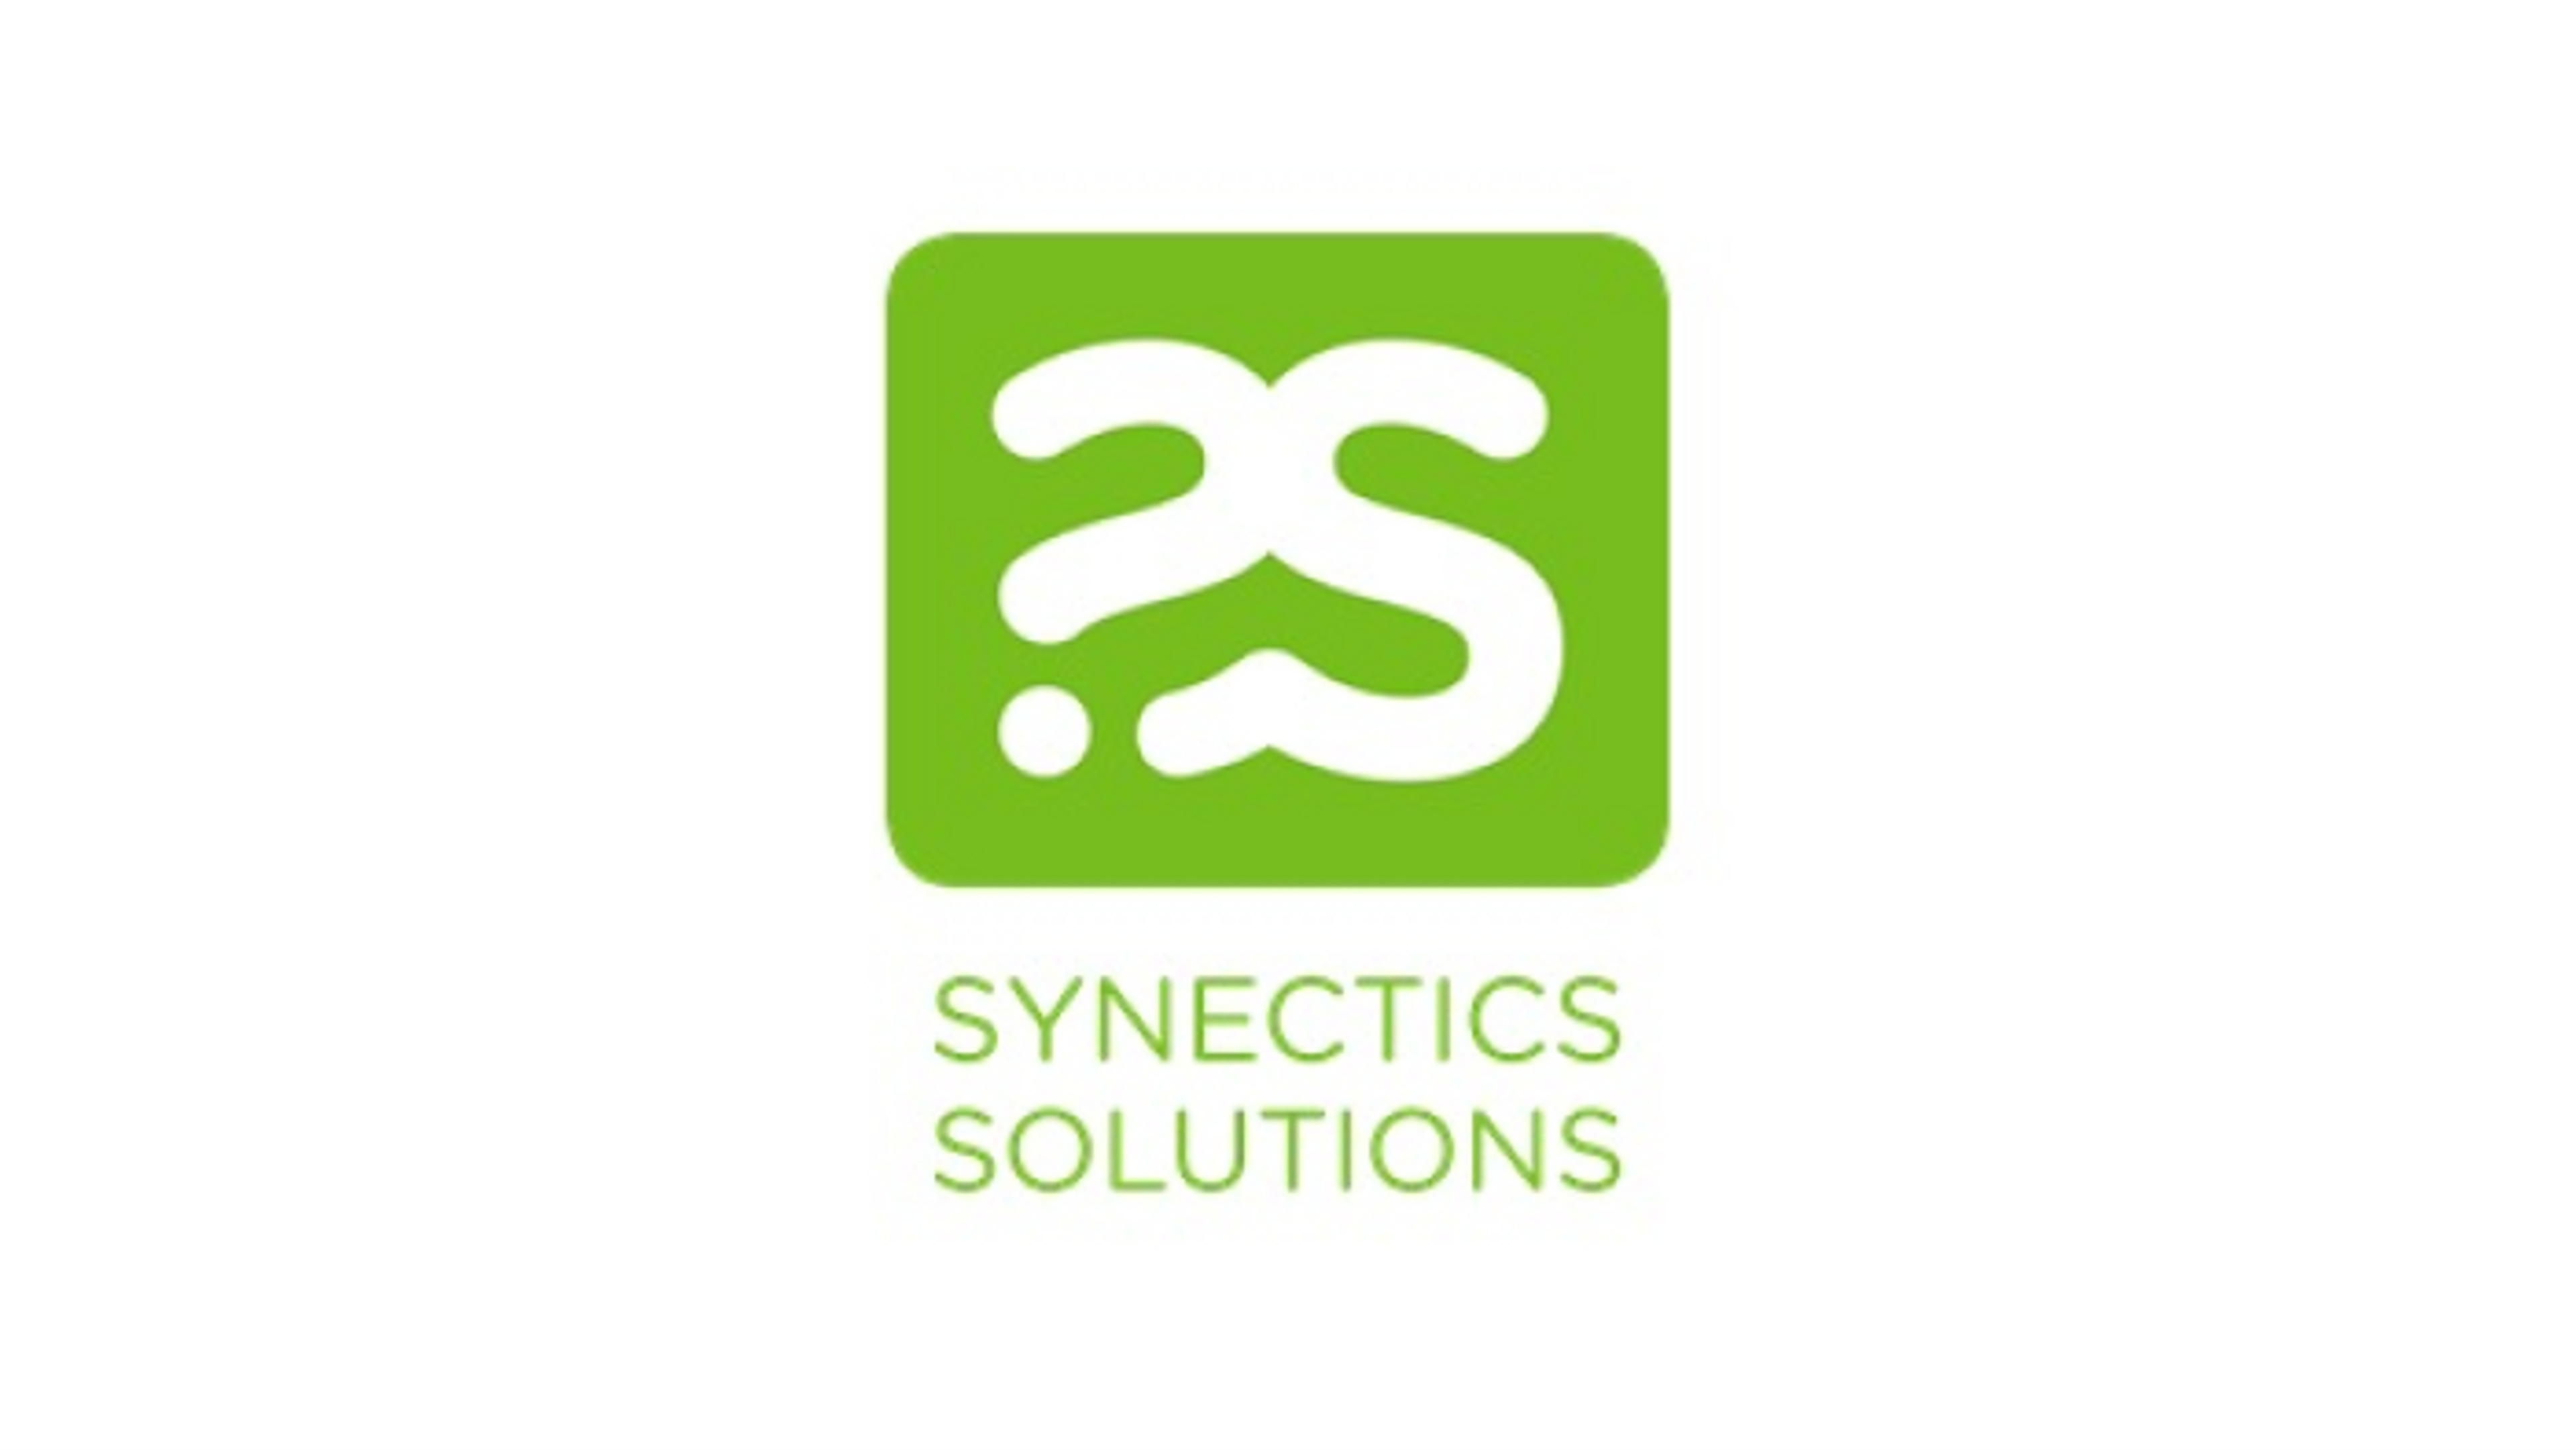 Zego partners with Synectics Solutions to automate fight against motor insurance fraud